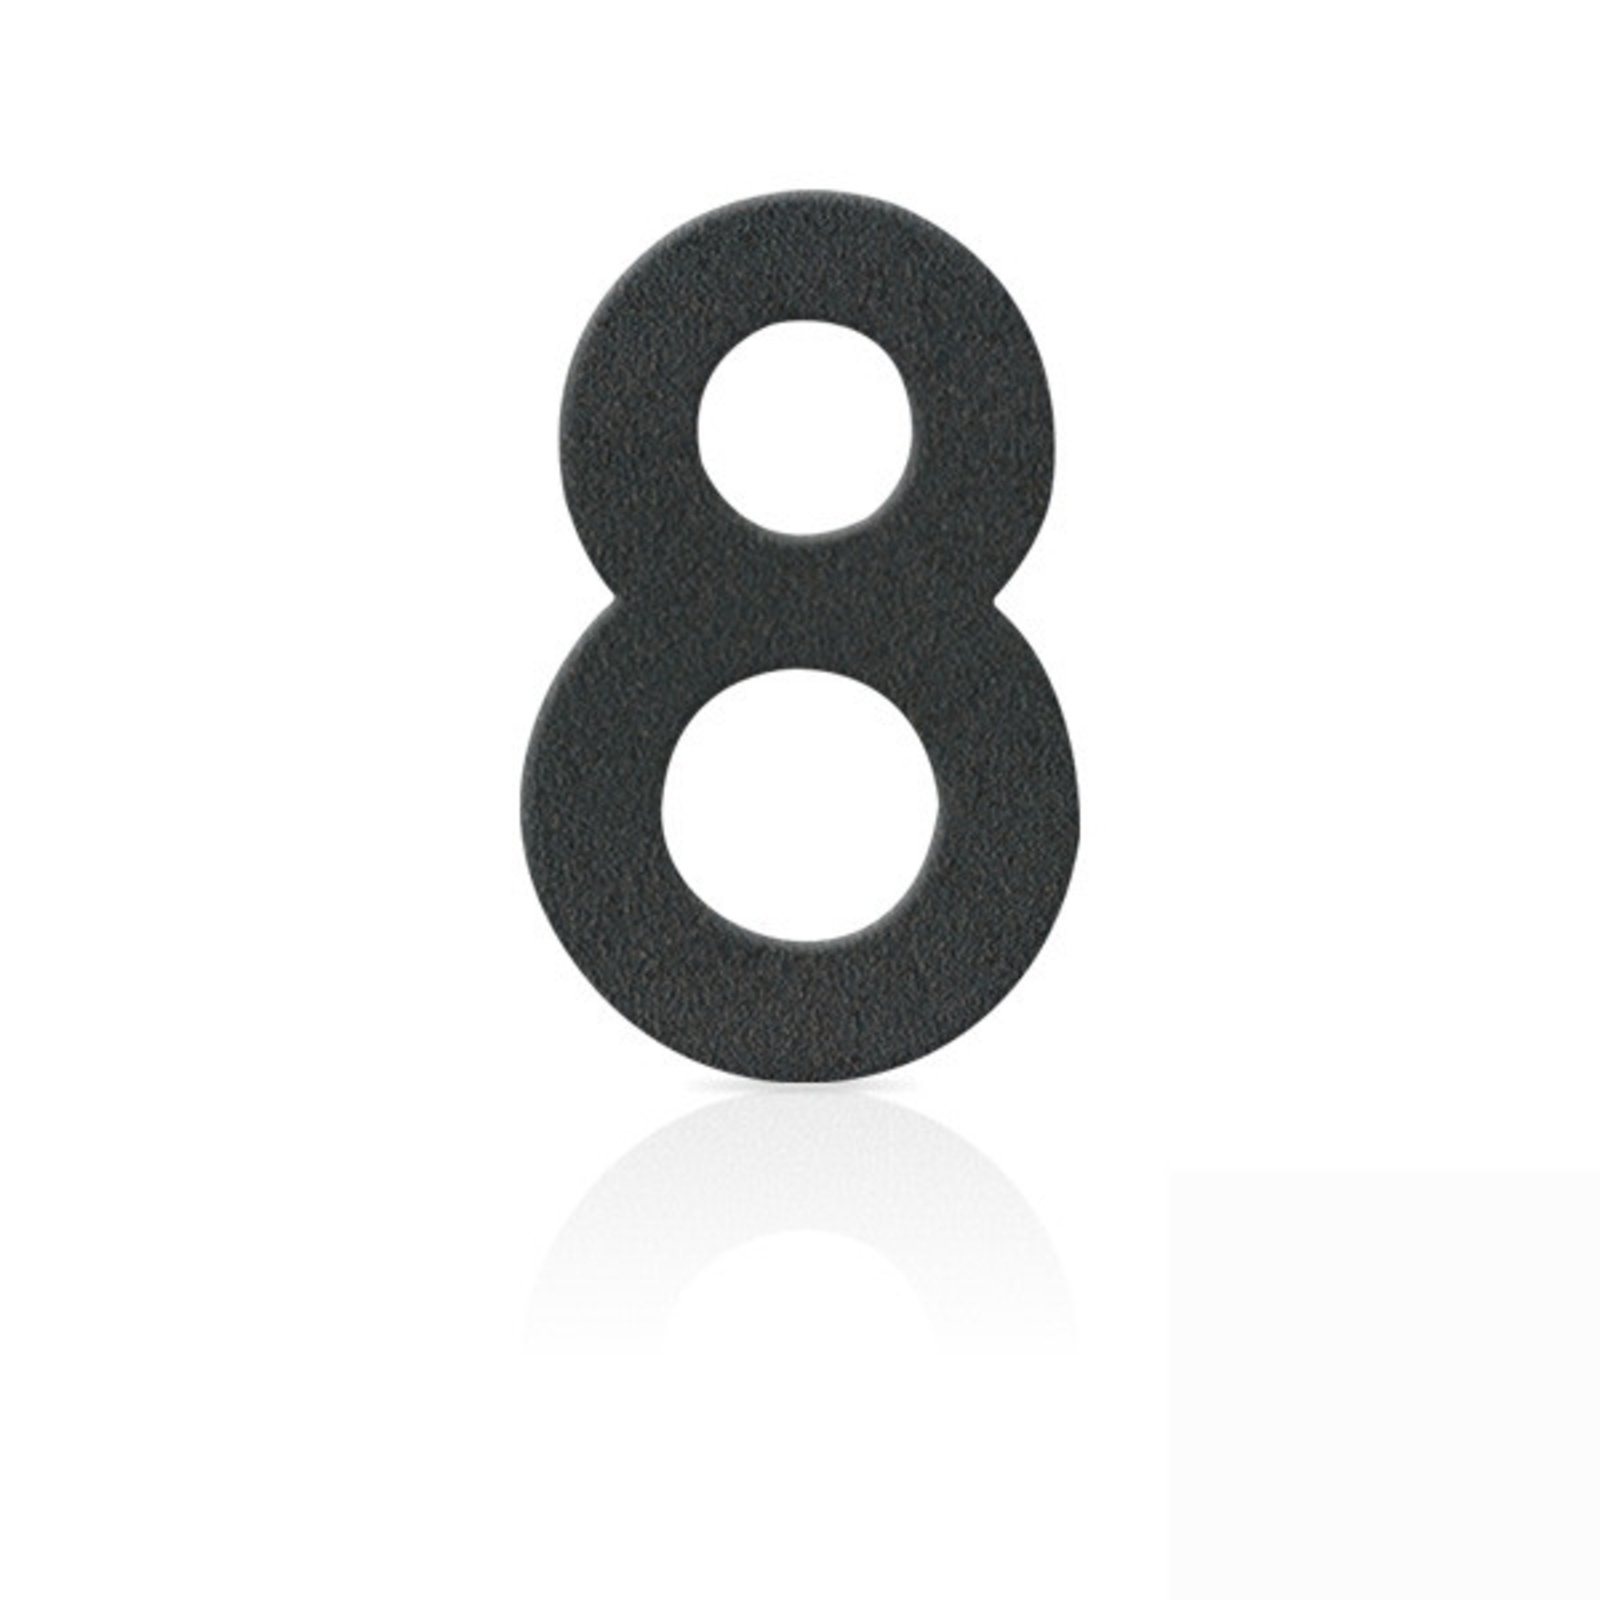 Stainless house numbers figure 8, graphite grey